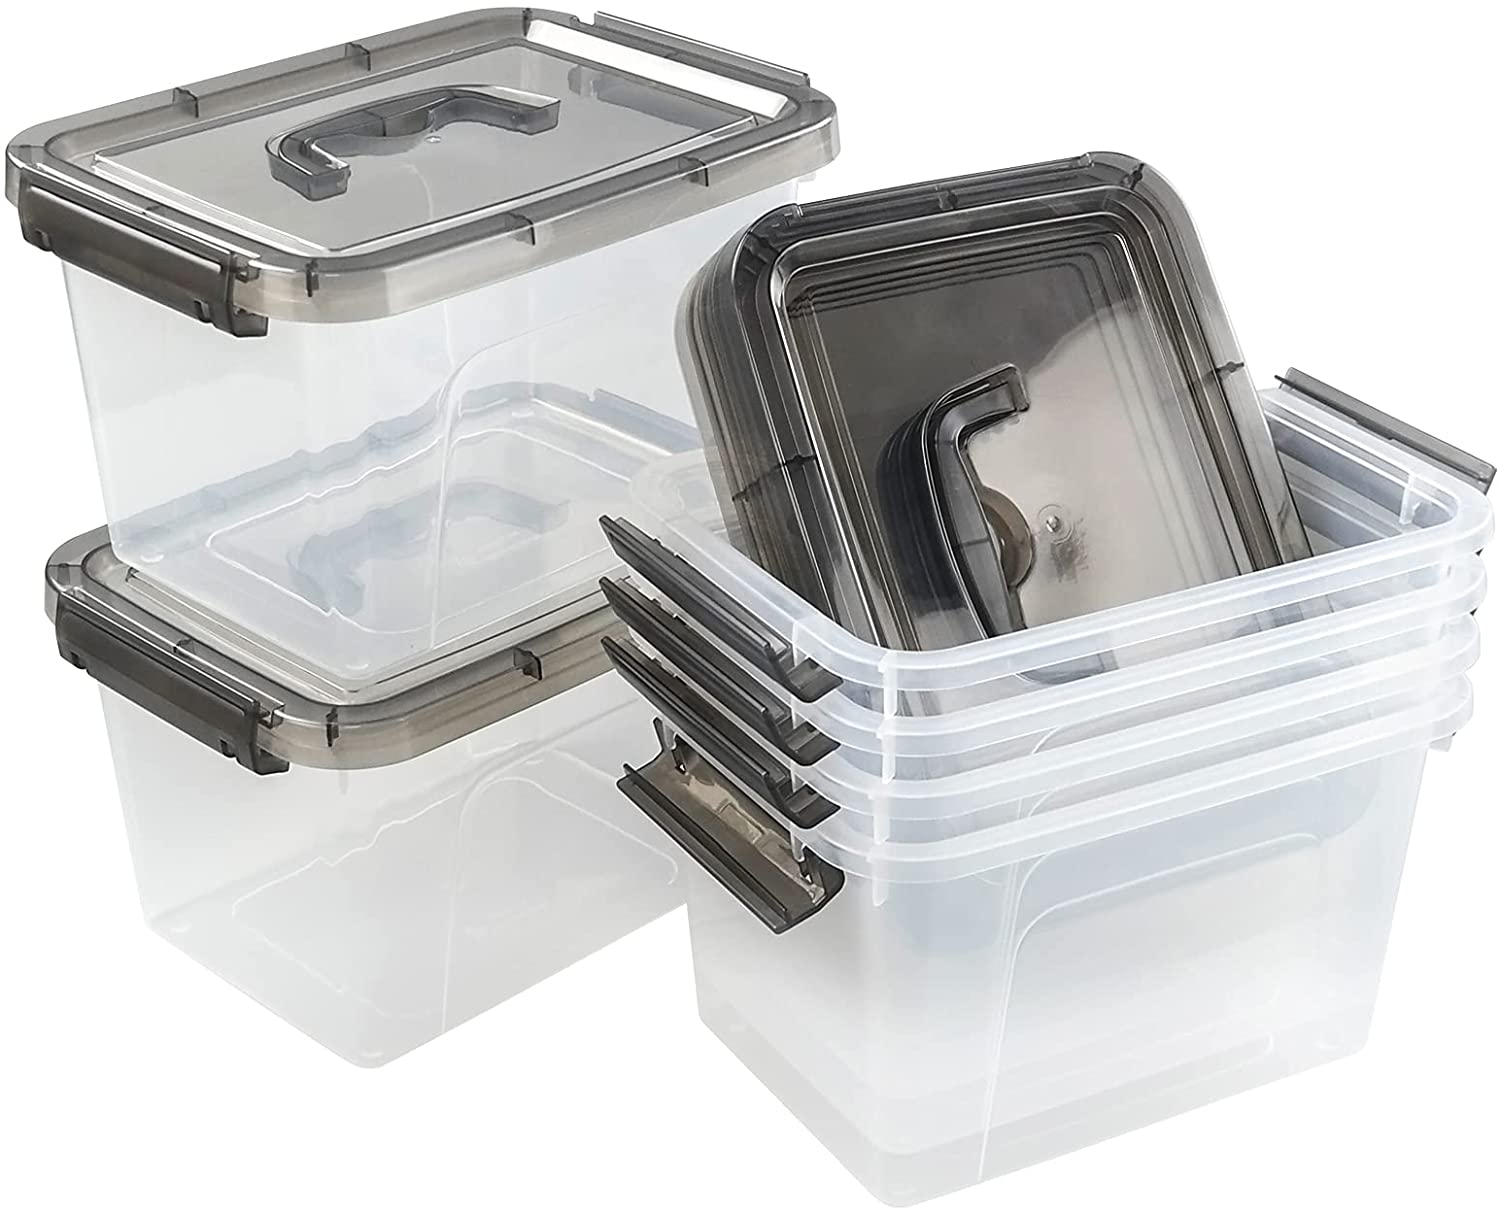 Plastic Storage Boxes, Small Clear Box with Grey Lid 